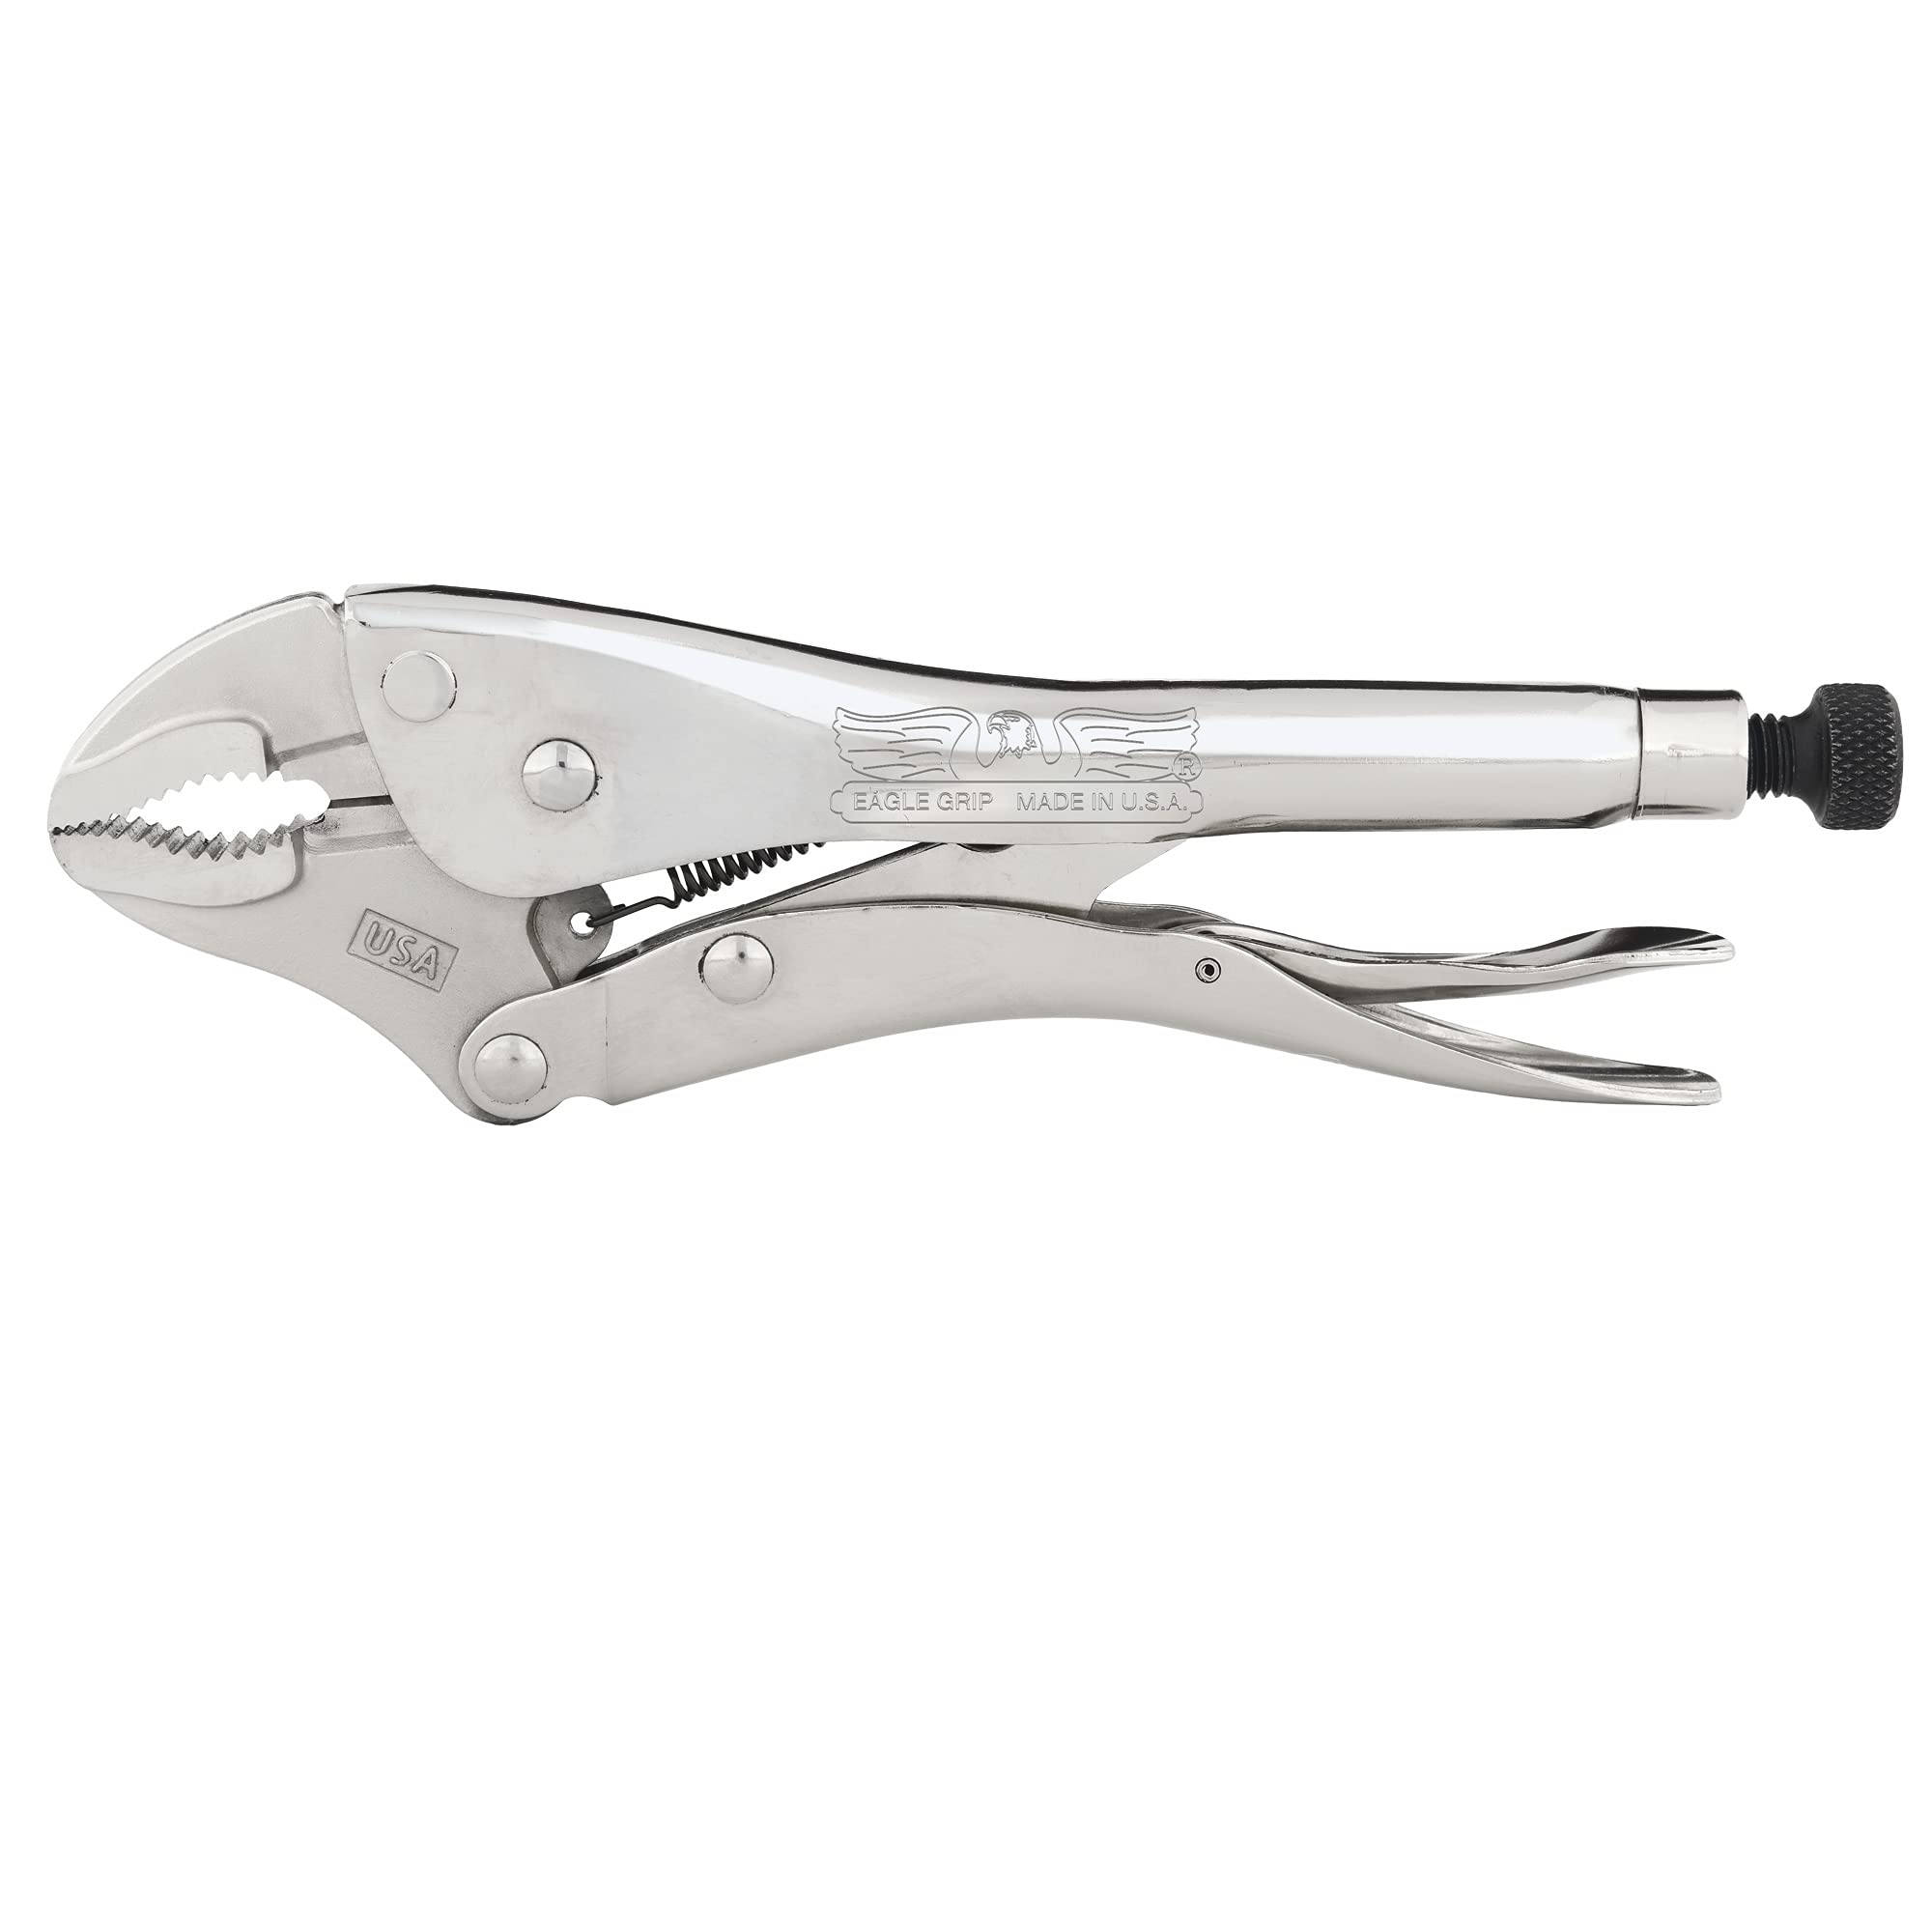 Malco Eagle Grip LP10WC 10 in. Curved Jaw Locking Pliers with Wire Cutter - $41.69 at TheHardwareCityCom via Amazon